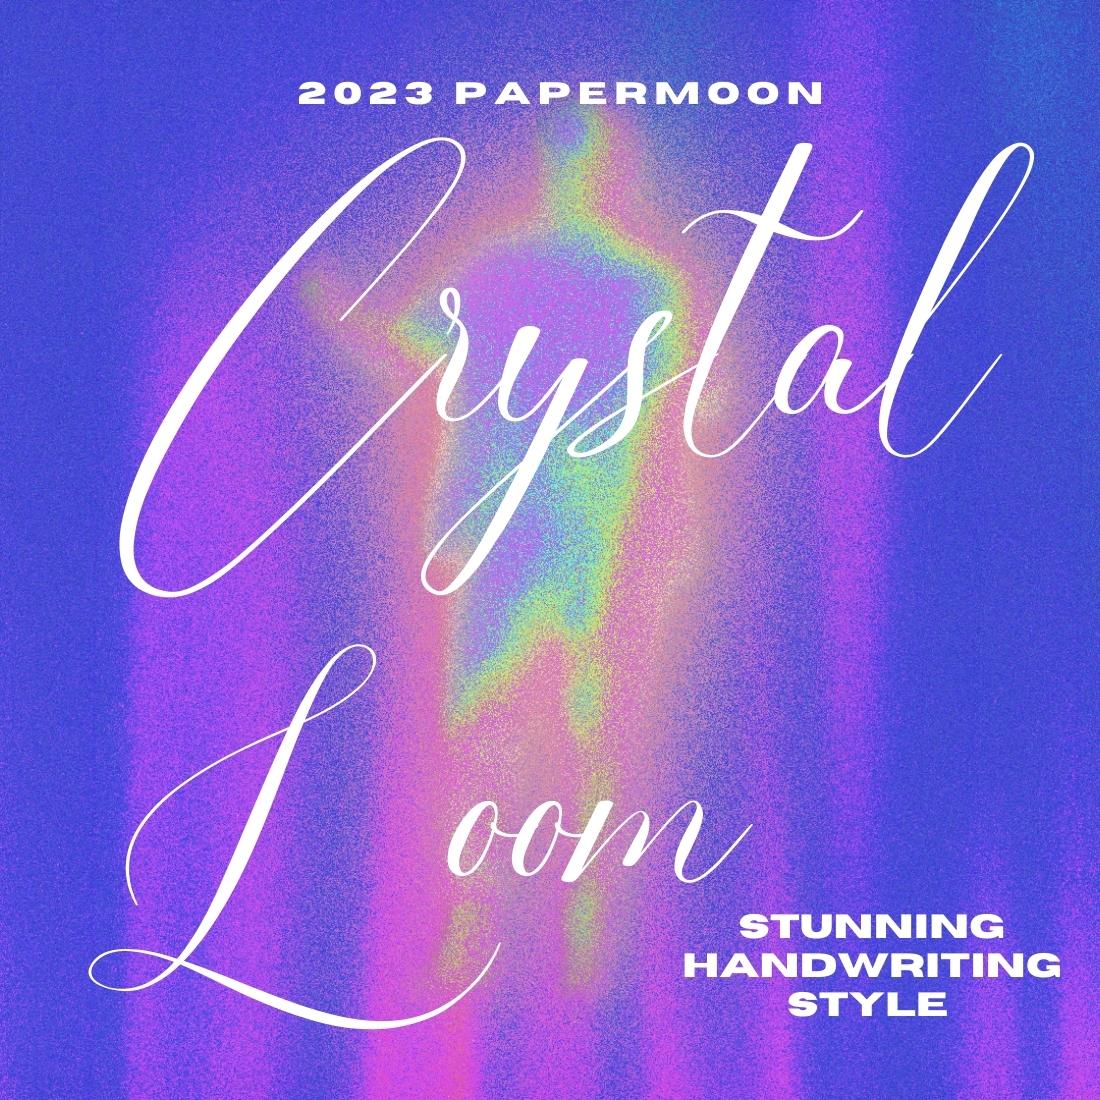 Crystal Loom Stunning Script Font cover image.